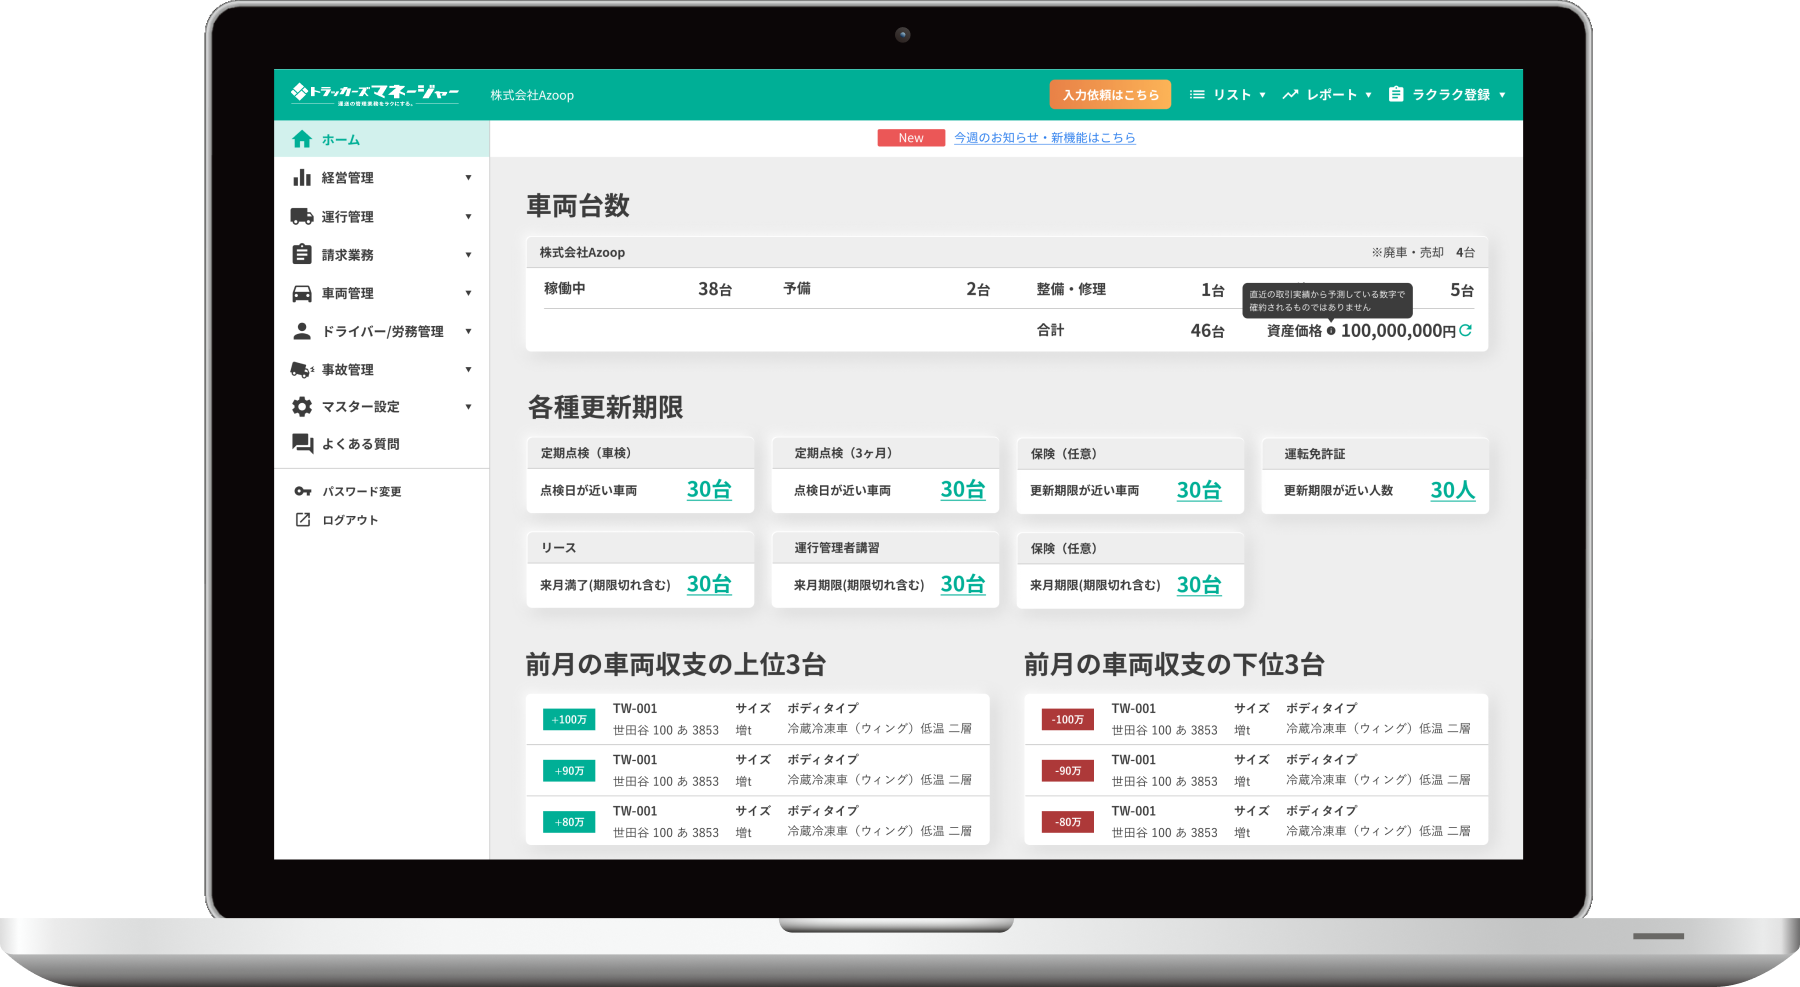 Trackers Manager interface